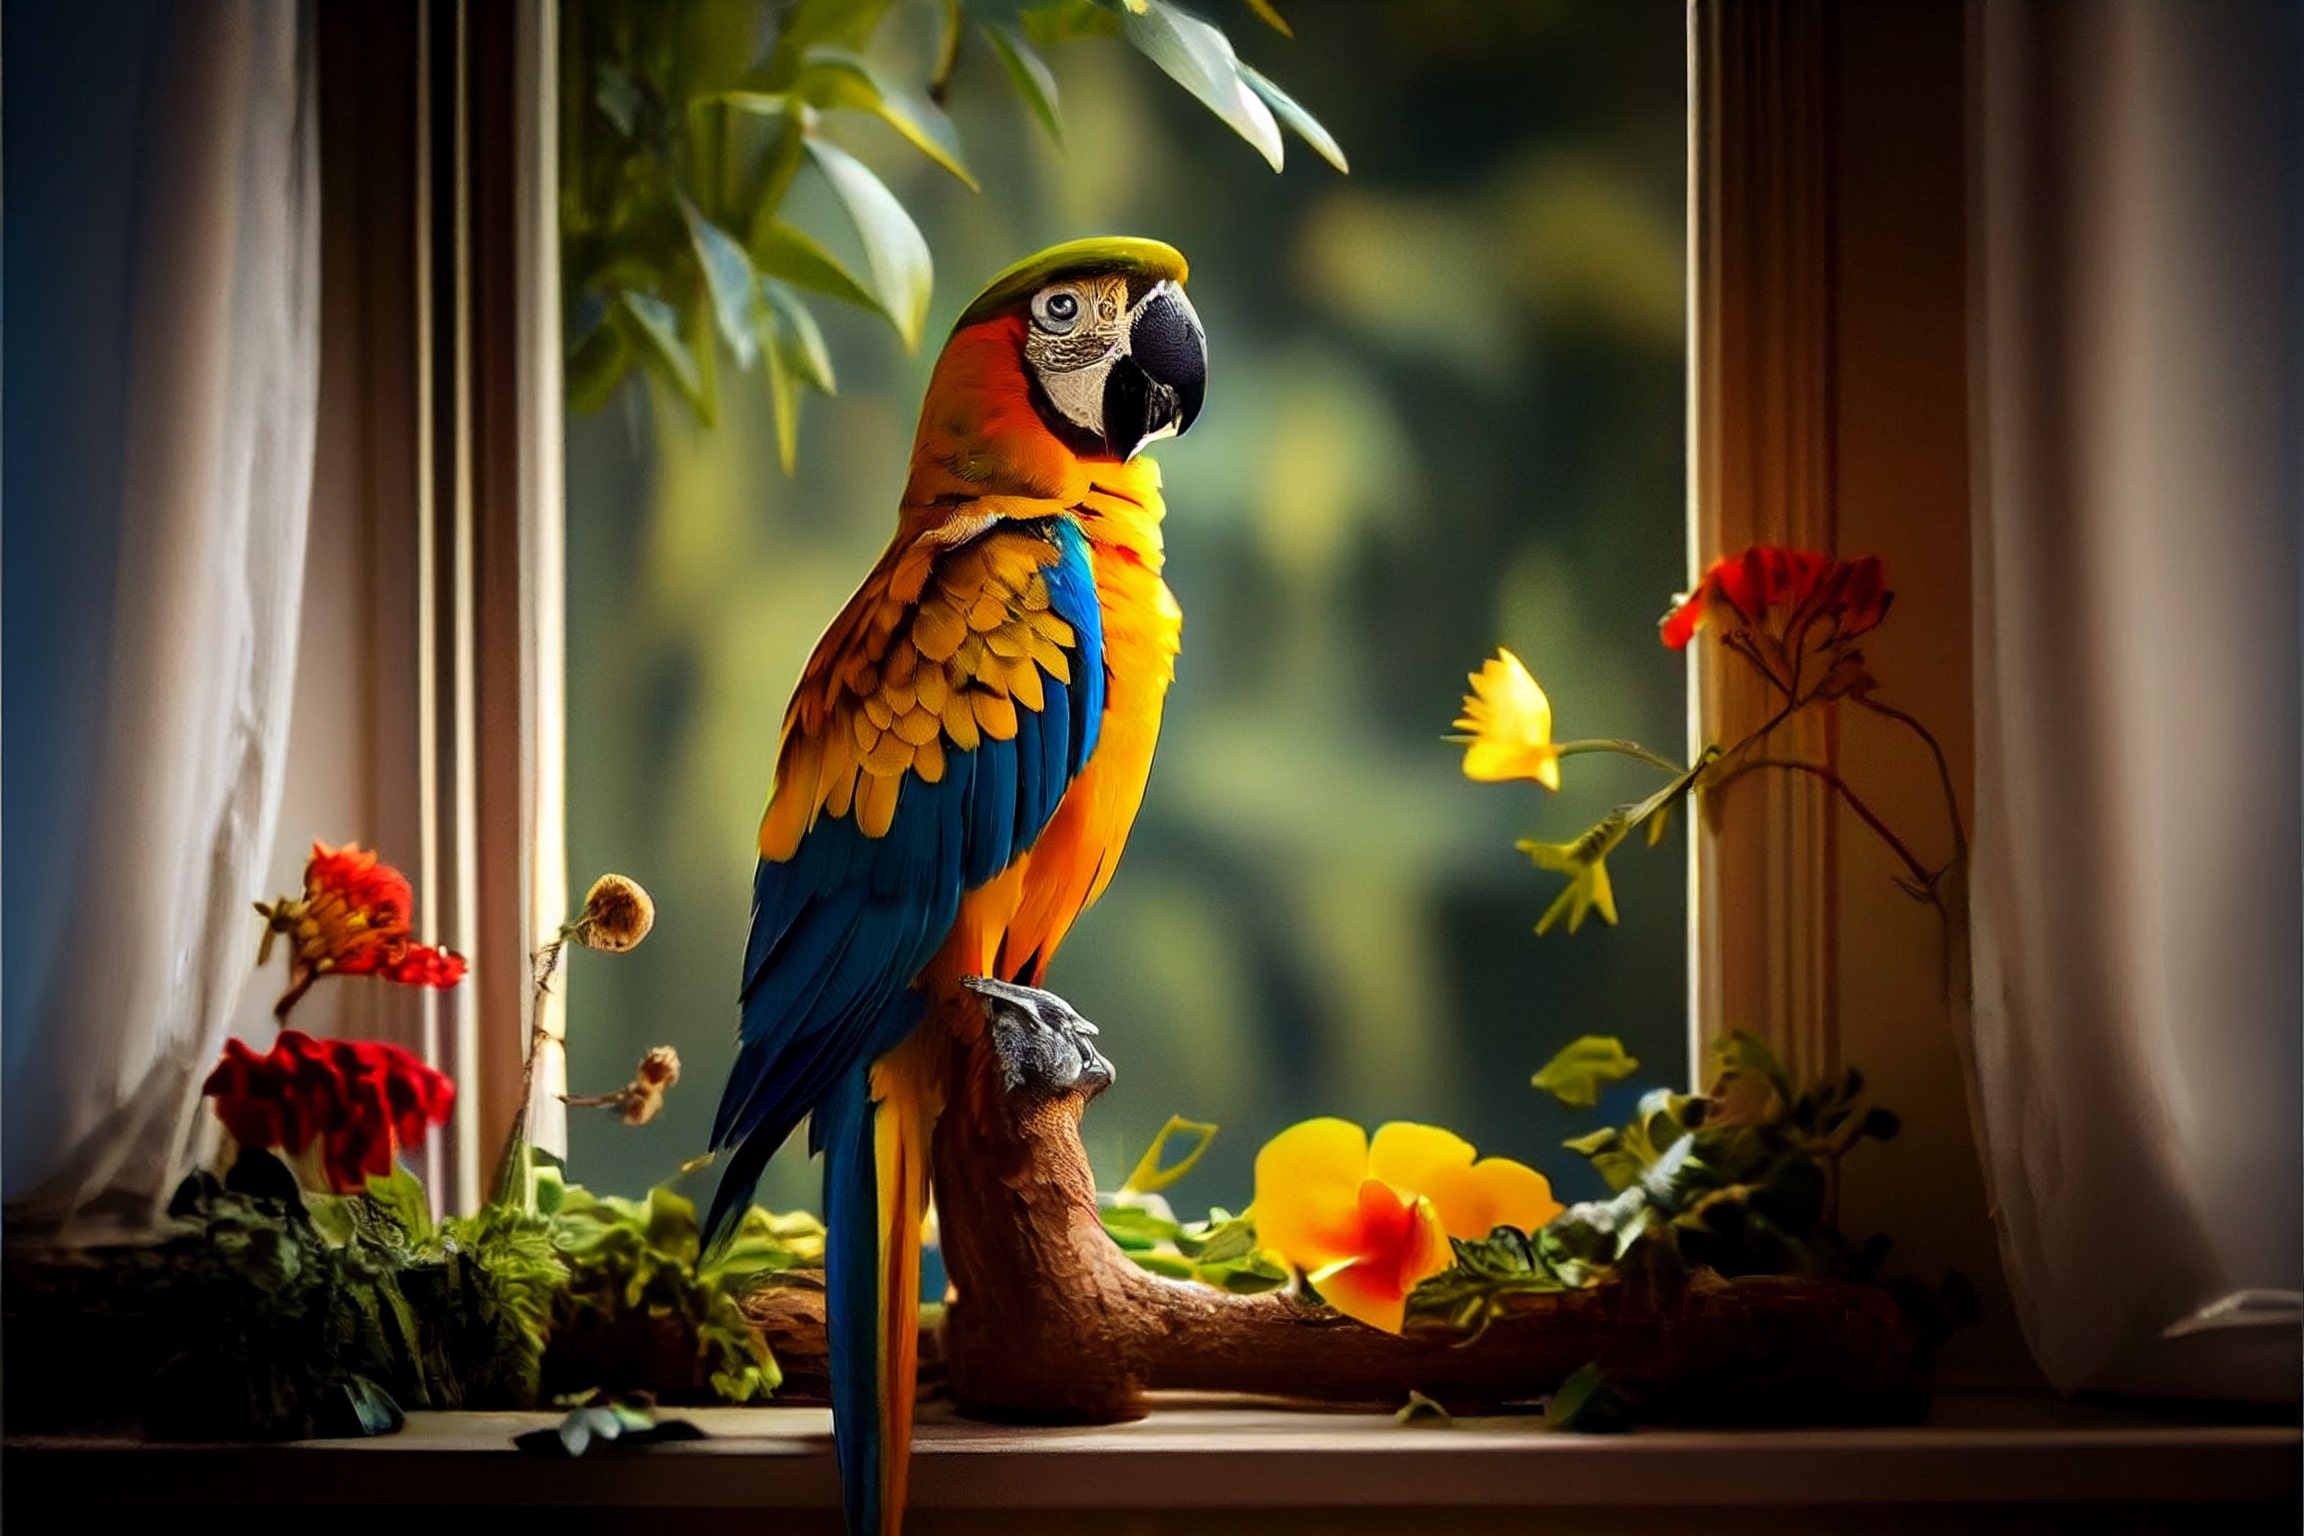 digitaldoodles realistic photography a macaw bird at home full b1a5d3f2 2322 415c 89da eba6f0de65e5 943